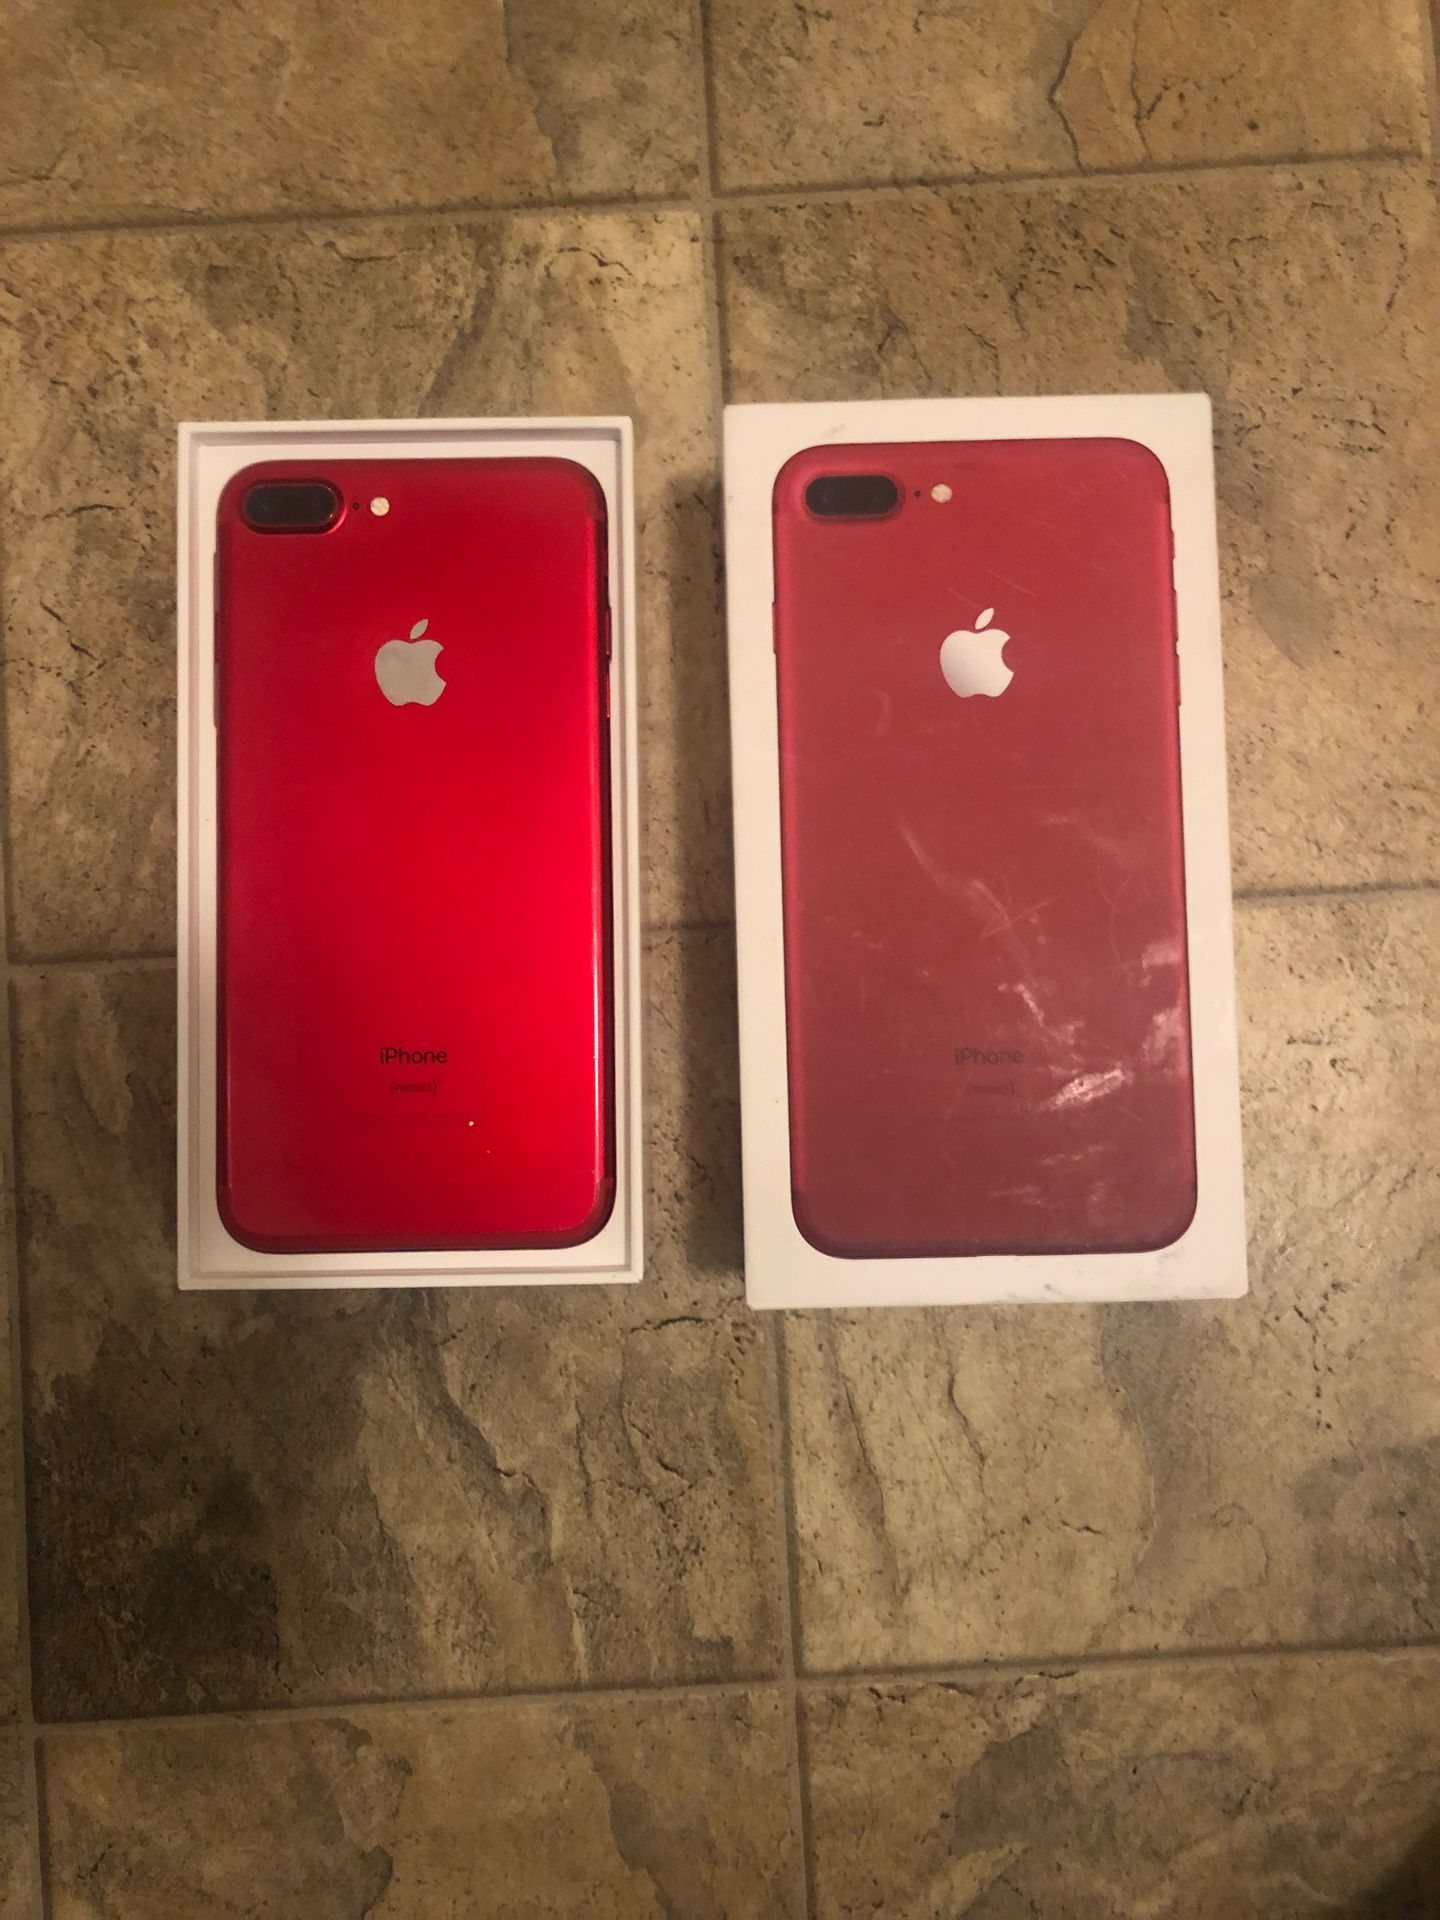 Iphone 7 plus (productRed) 128gb unlocked